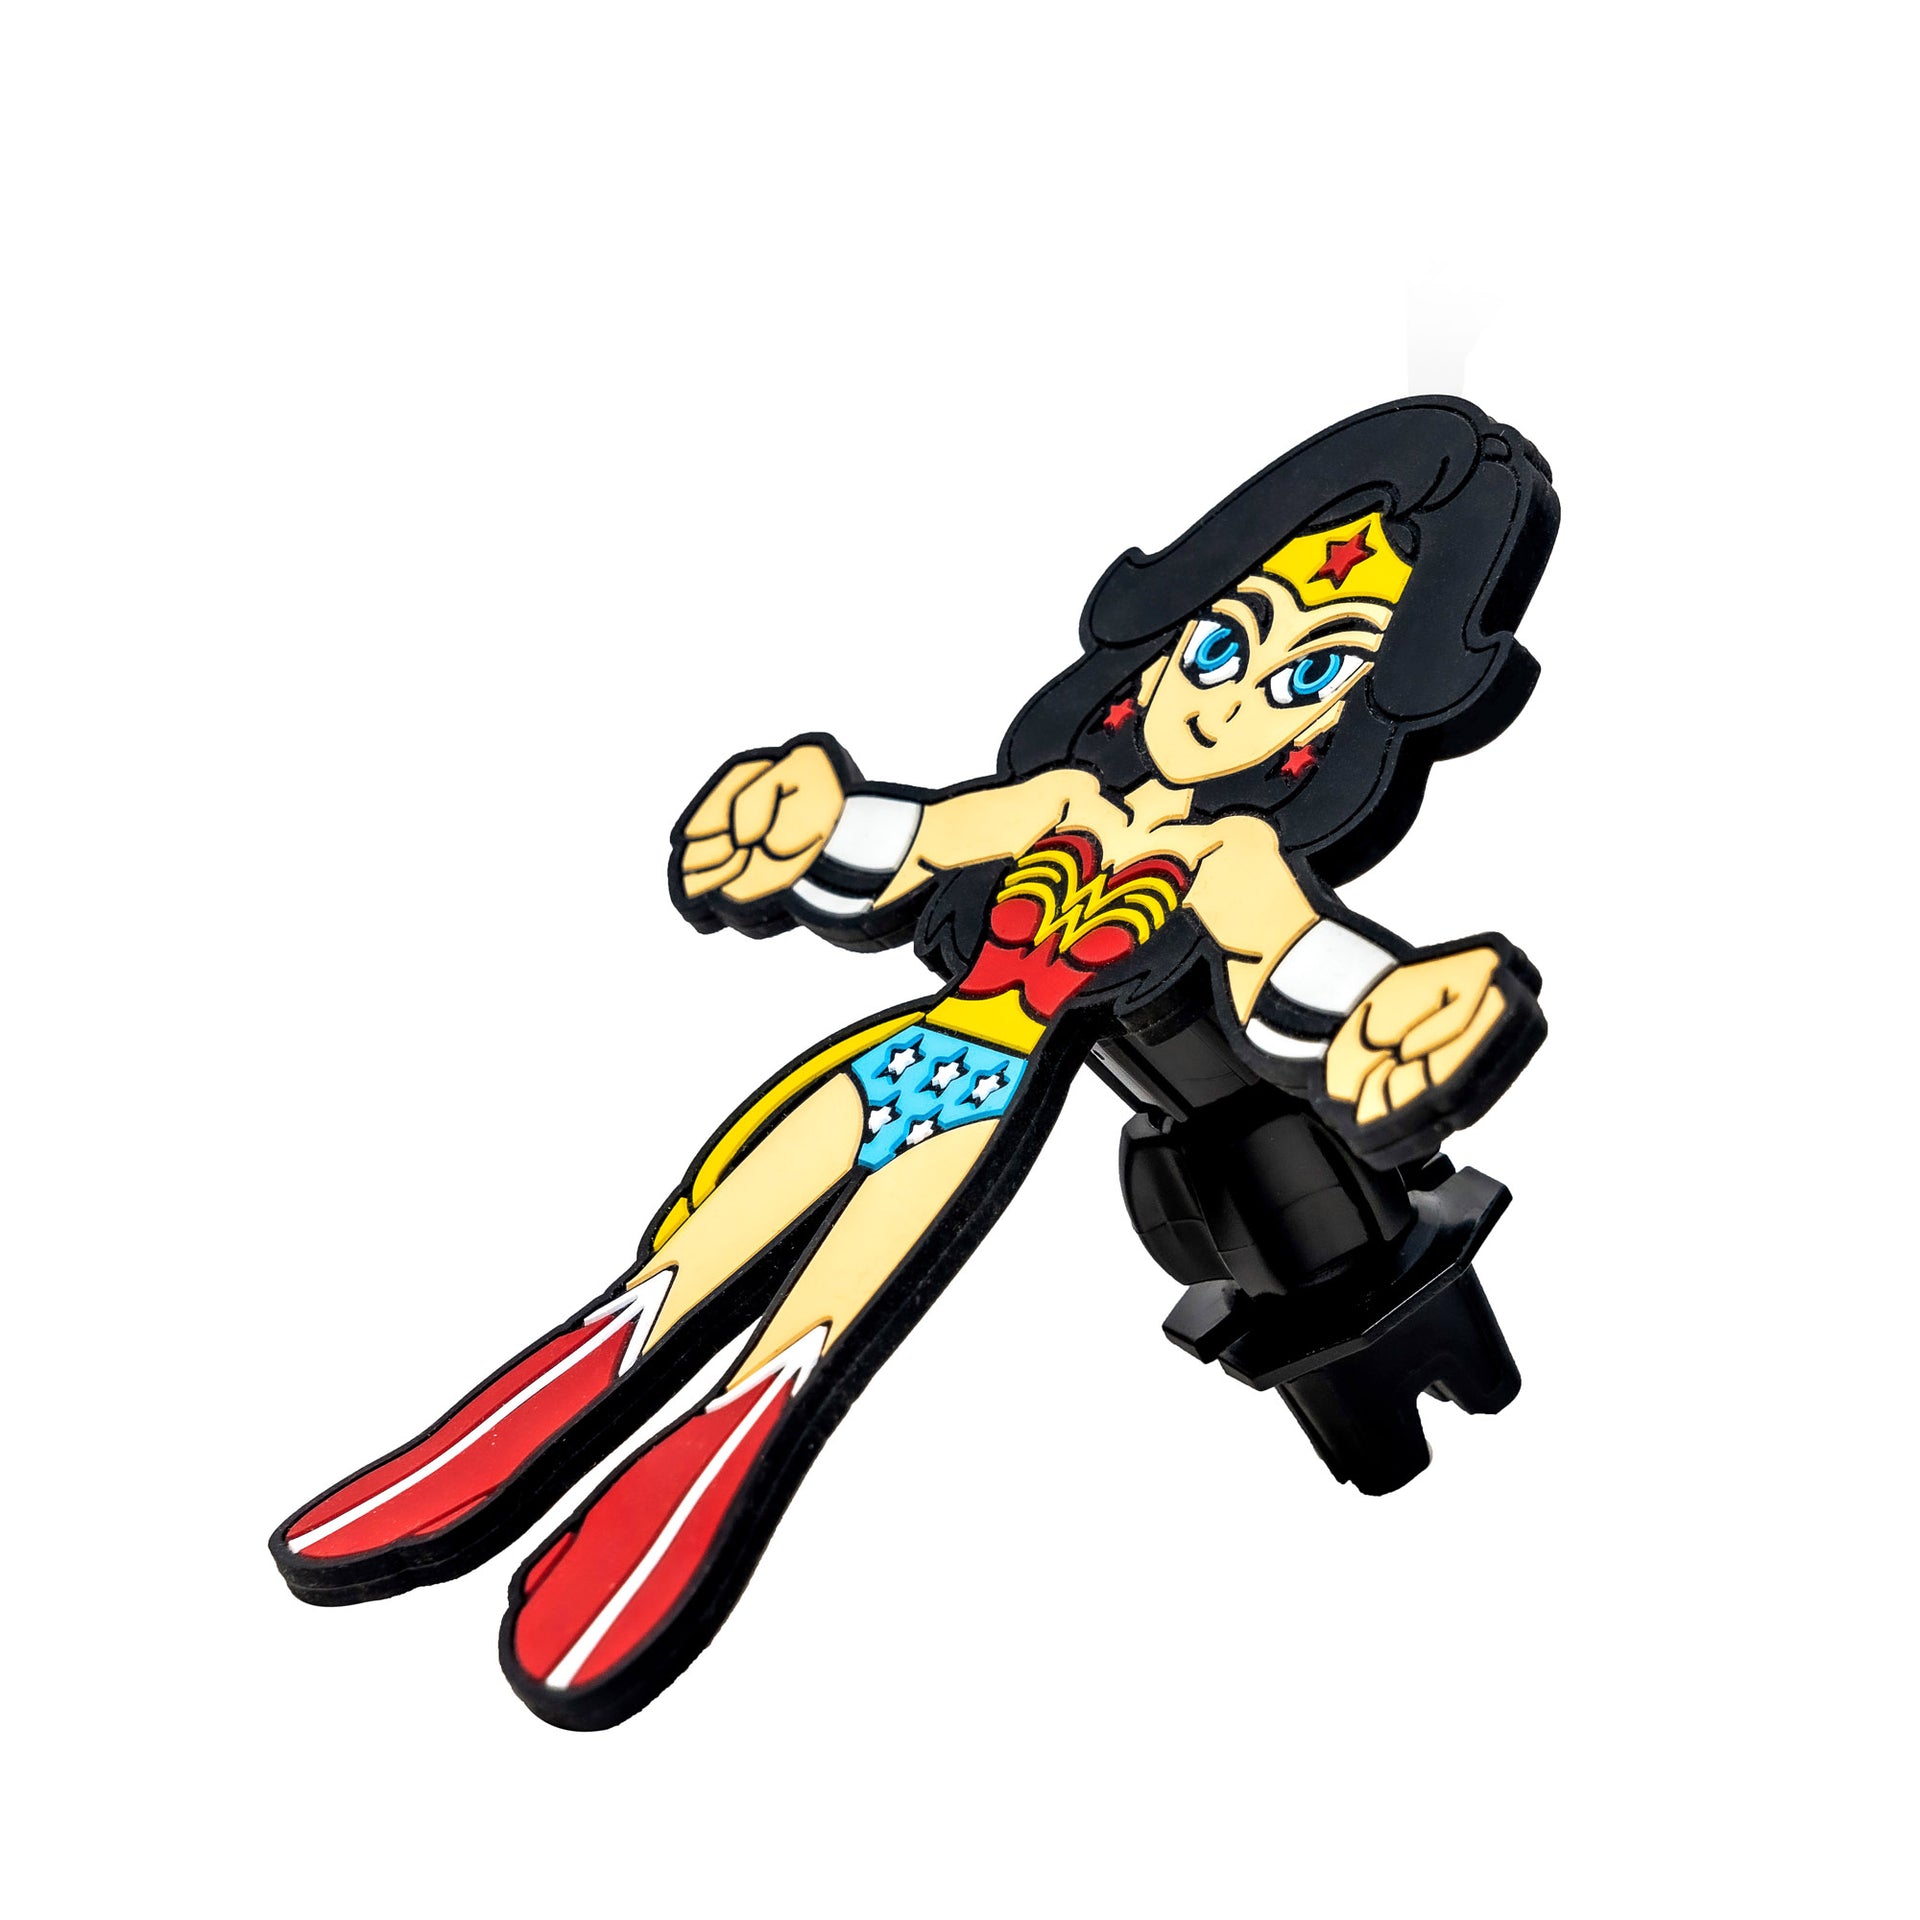 Image of DC Comics Wonder Woman Hug Buddy resting on its vent clip at a 45 degree angle on a white background